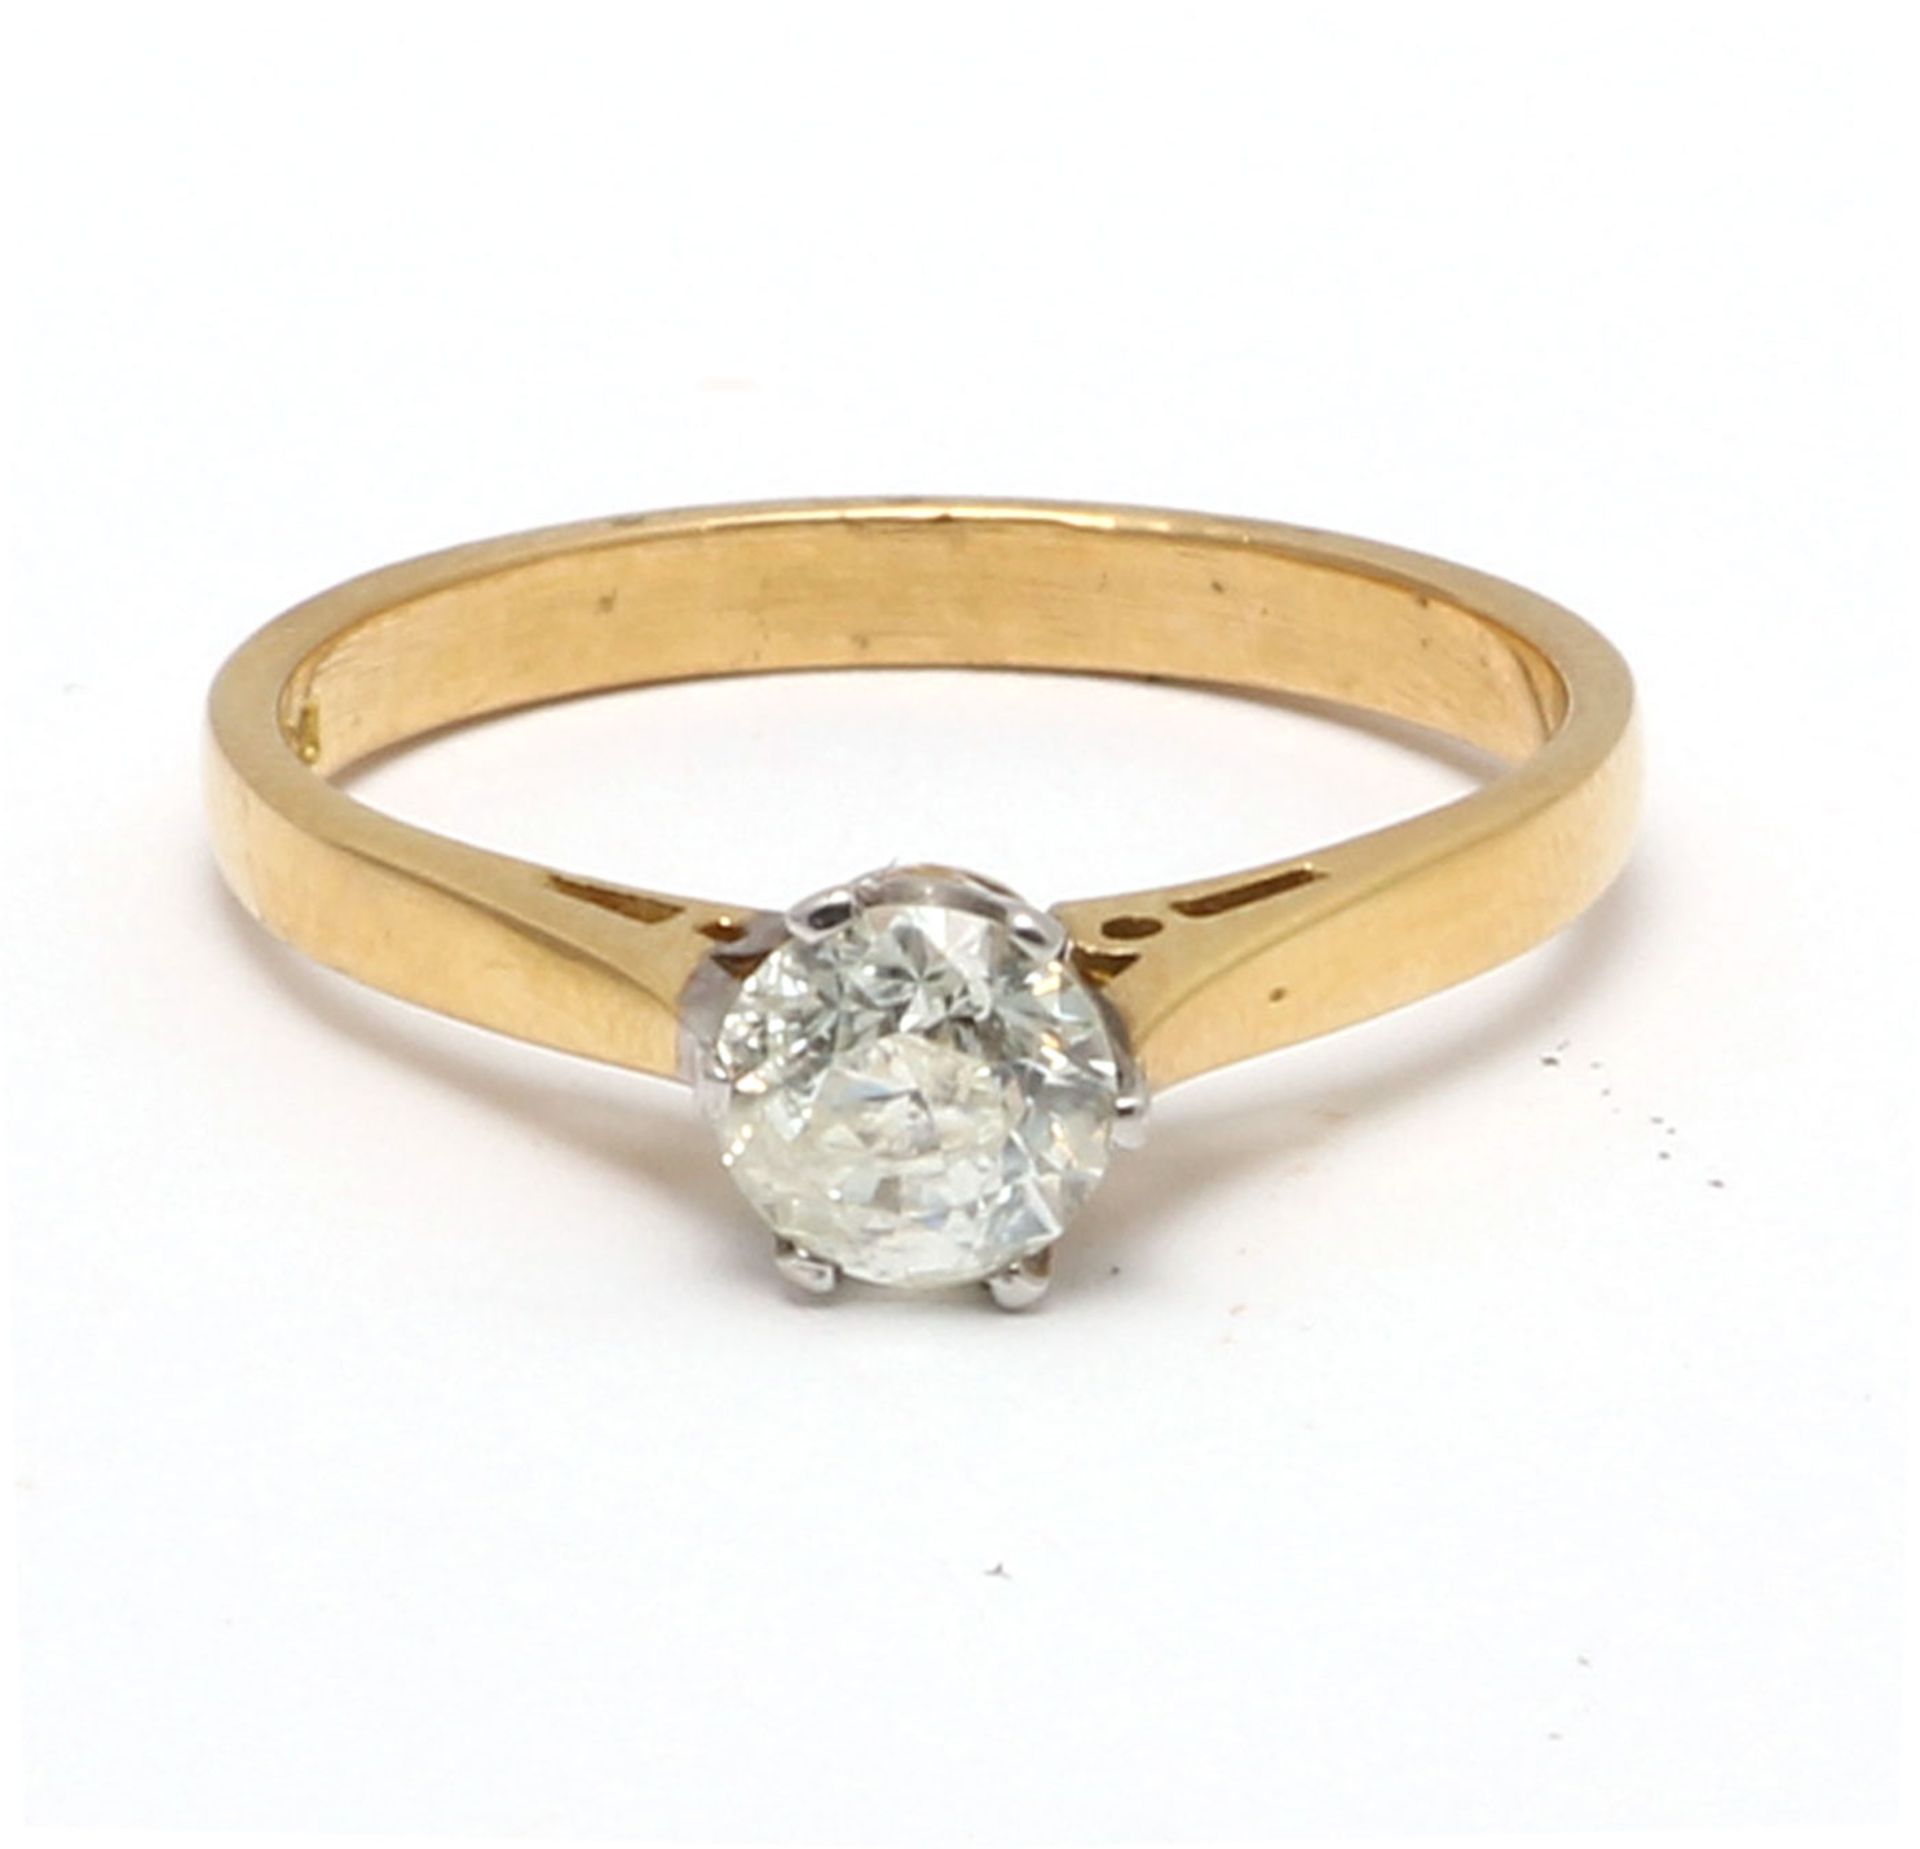 18ct Yellow Gold Diamond Engagement Ring 0.61 Carats - Image 5 of 6